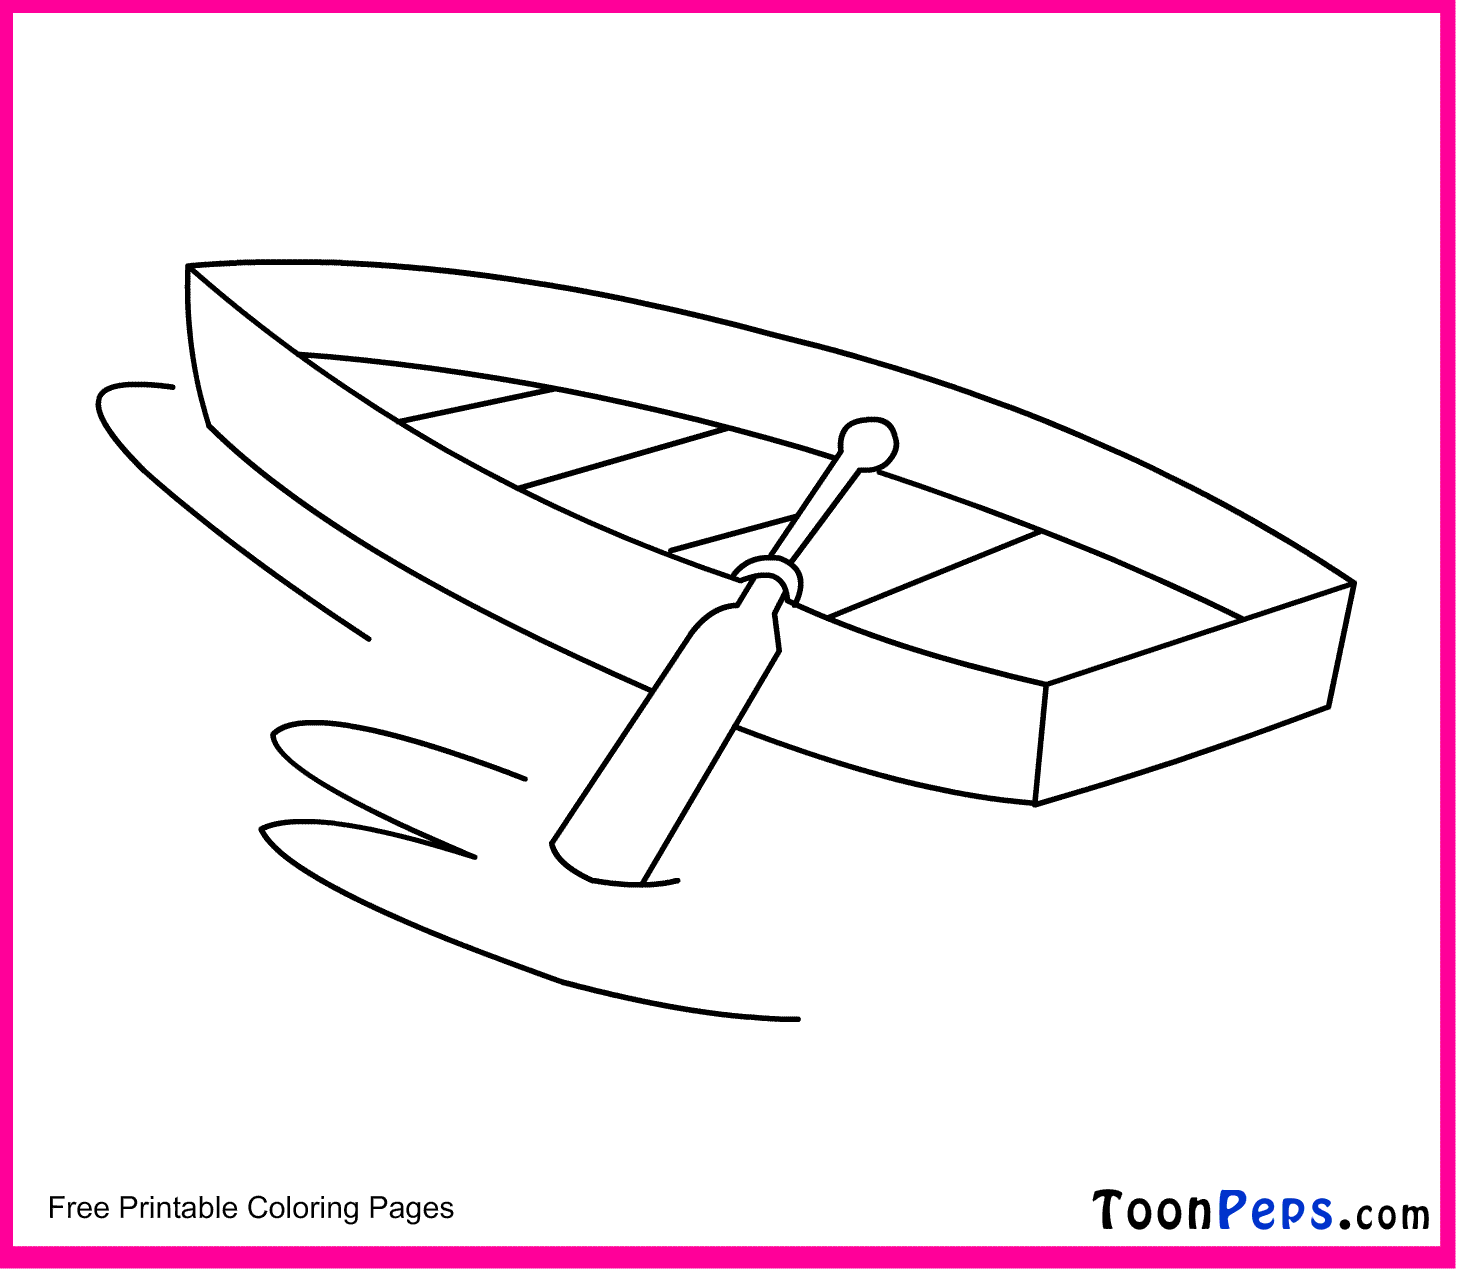 Ship - Drawing Pictures For Kids Boat - Free Transparent PNG Clipart Images  Download